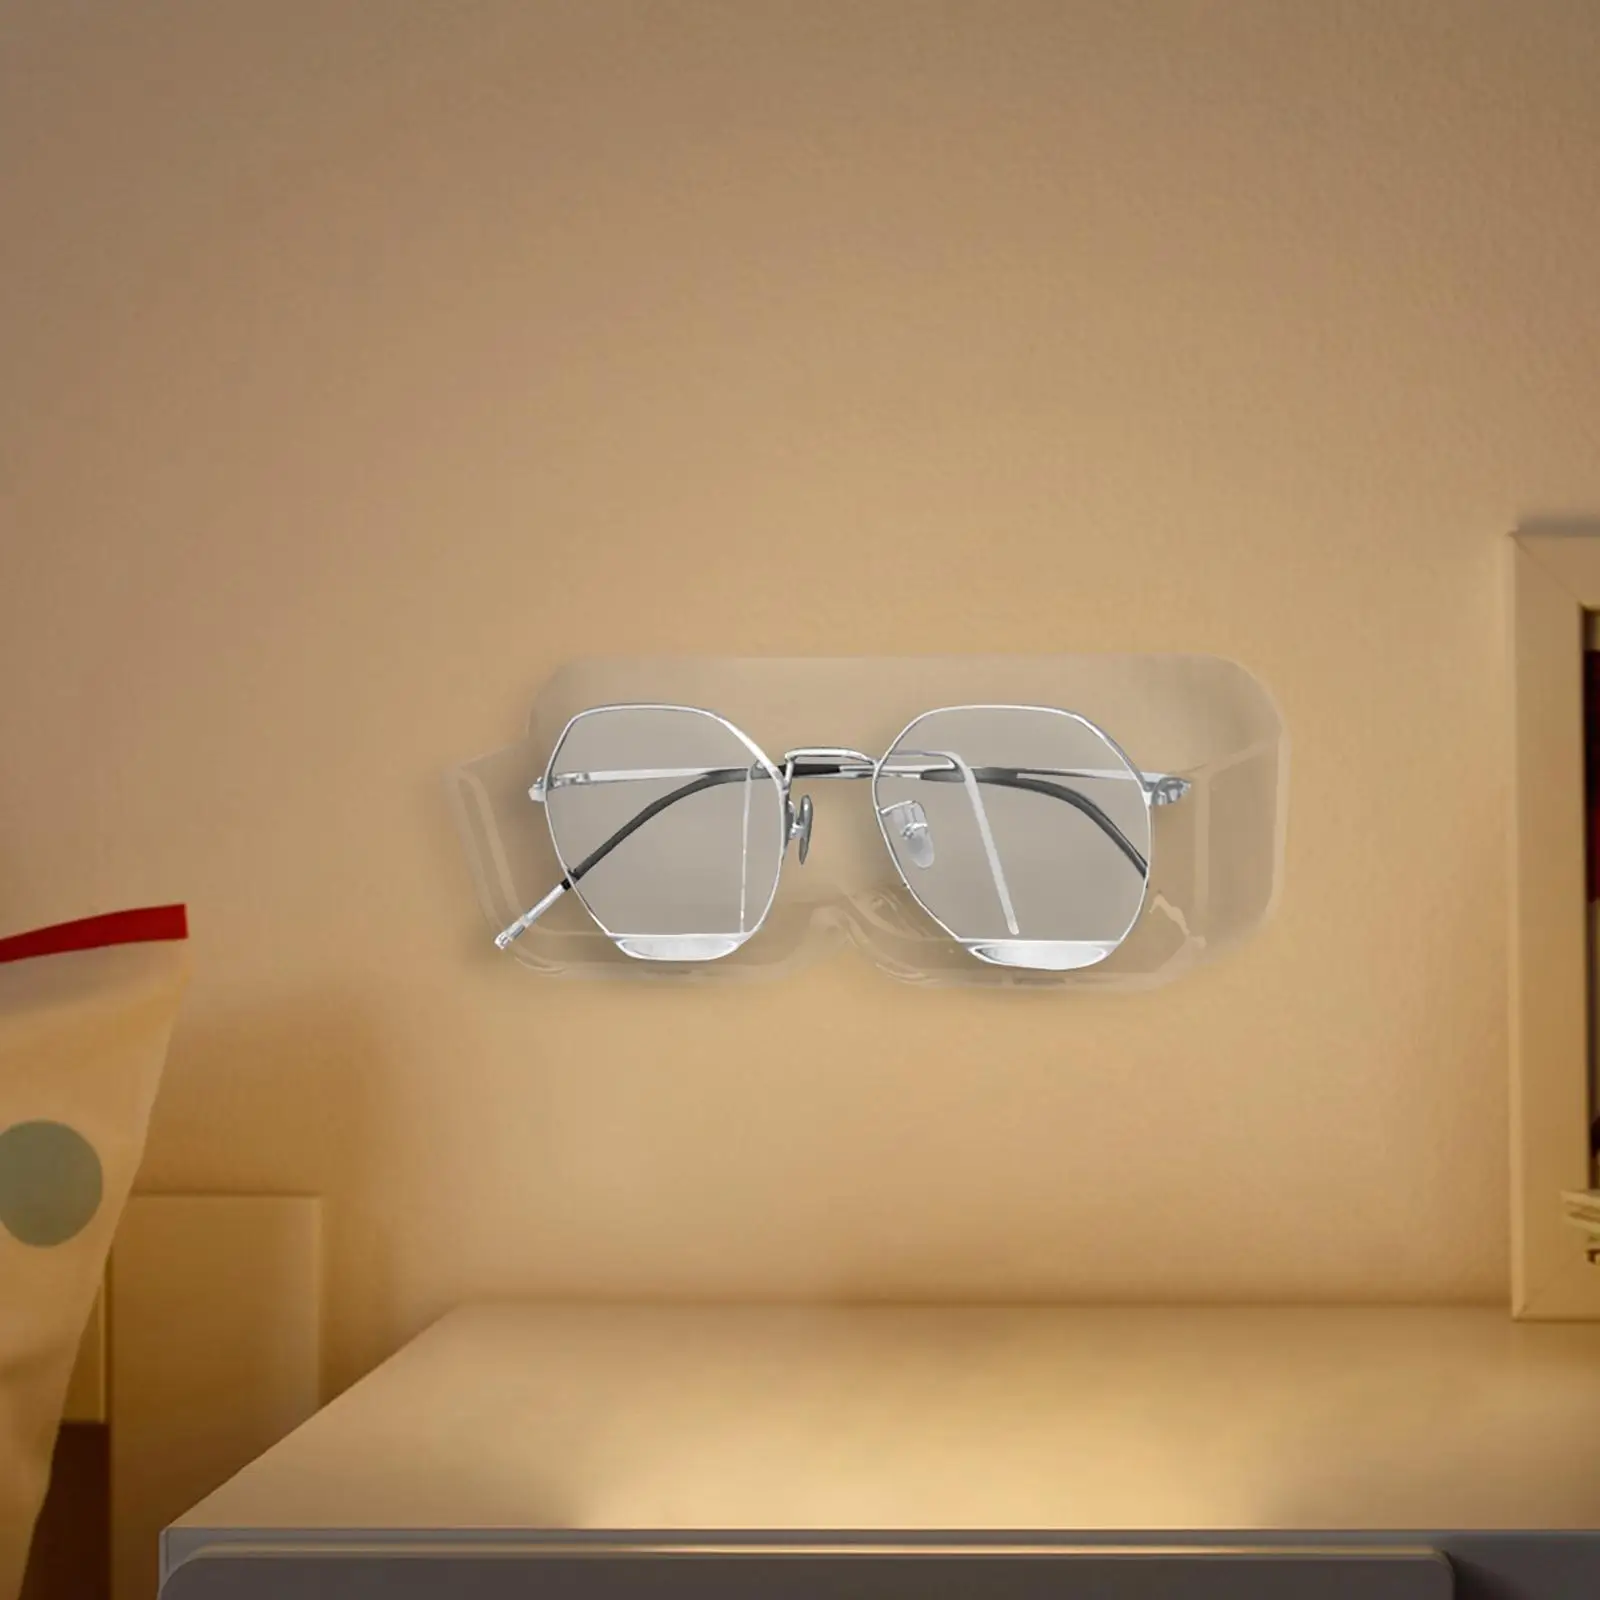 Eyeglasses Holder Stand Wall Mounted Stylish Space Saving Glasses Storage Display Rack for Entry Showcase Home Desktop Store